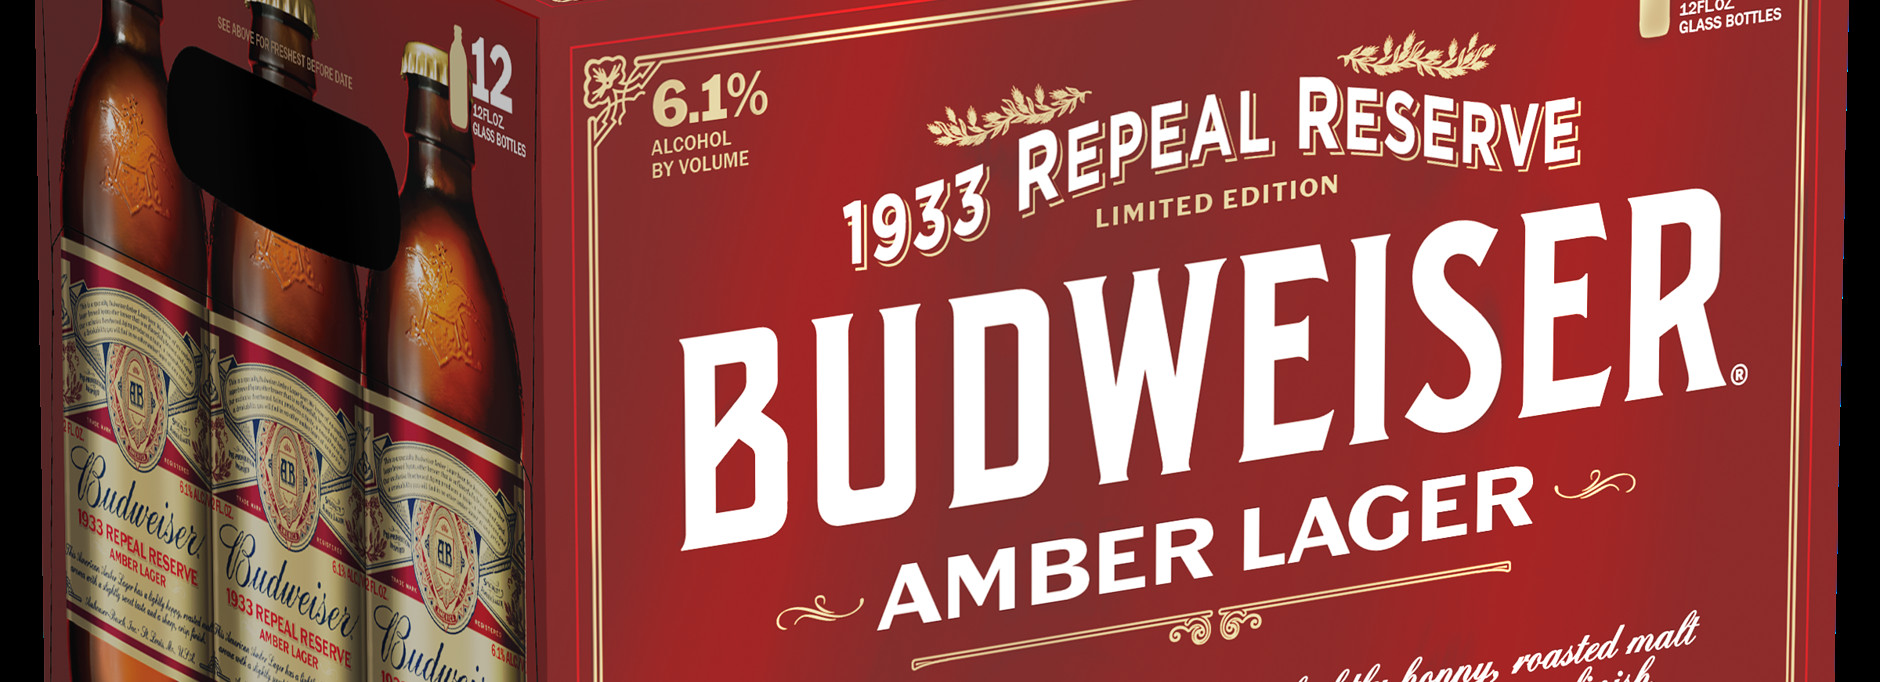 What Is The #1 Beer In The World: Budweiser